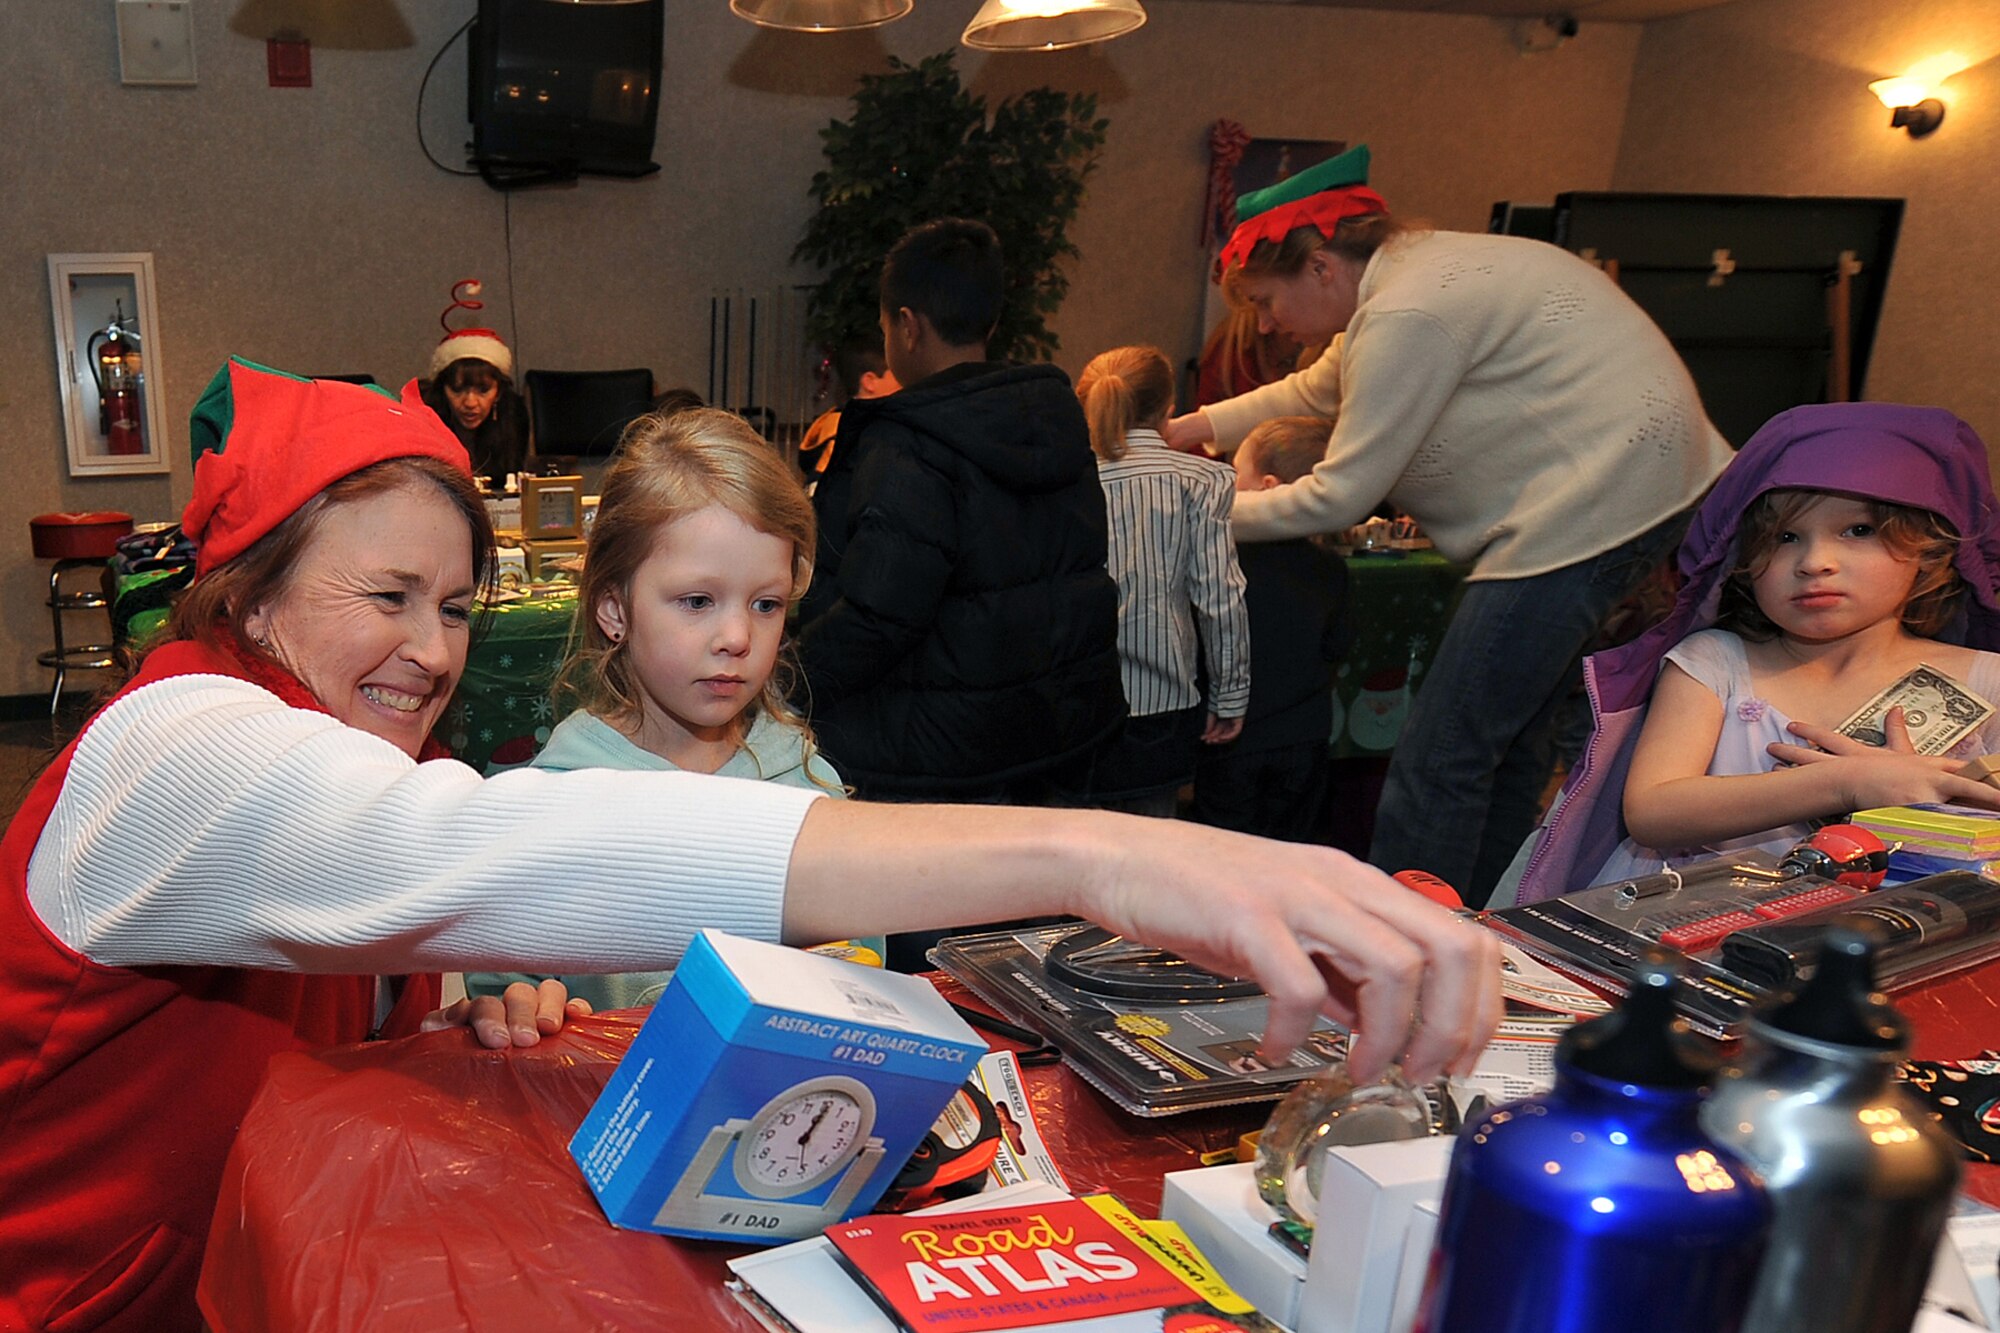 OFFUTT AIR FORCE BASE, Neb. - Laura Shanahan, wife of the 55th Wing commander Brig. Gen. John N.T. Shanahan, helps Carley Powers pick out a gift for her father Staff Sgt. Brian Powers, 55th Civil Engineering Squadron, during the tree lighting and holiday events inside the Community Activity Center Dec. 02. This annual event provides Team Offutt member and their families a fun environment to share their joy and give presents to their love ones this Christmas season.  U.S. Air Force Photo by Charles Haymond